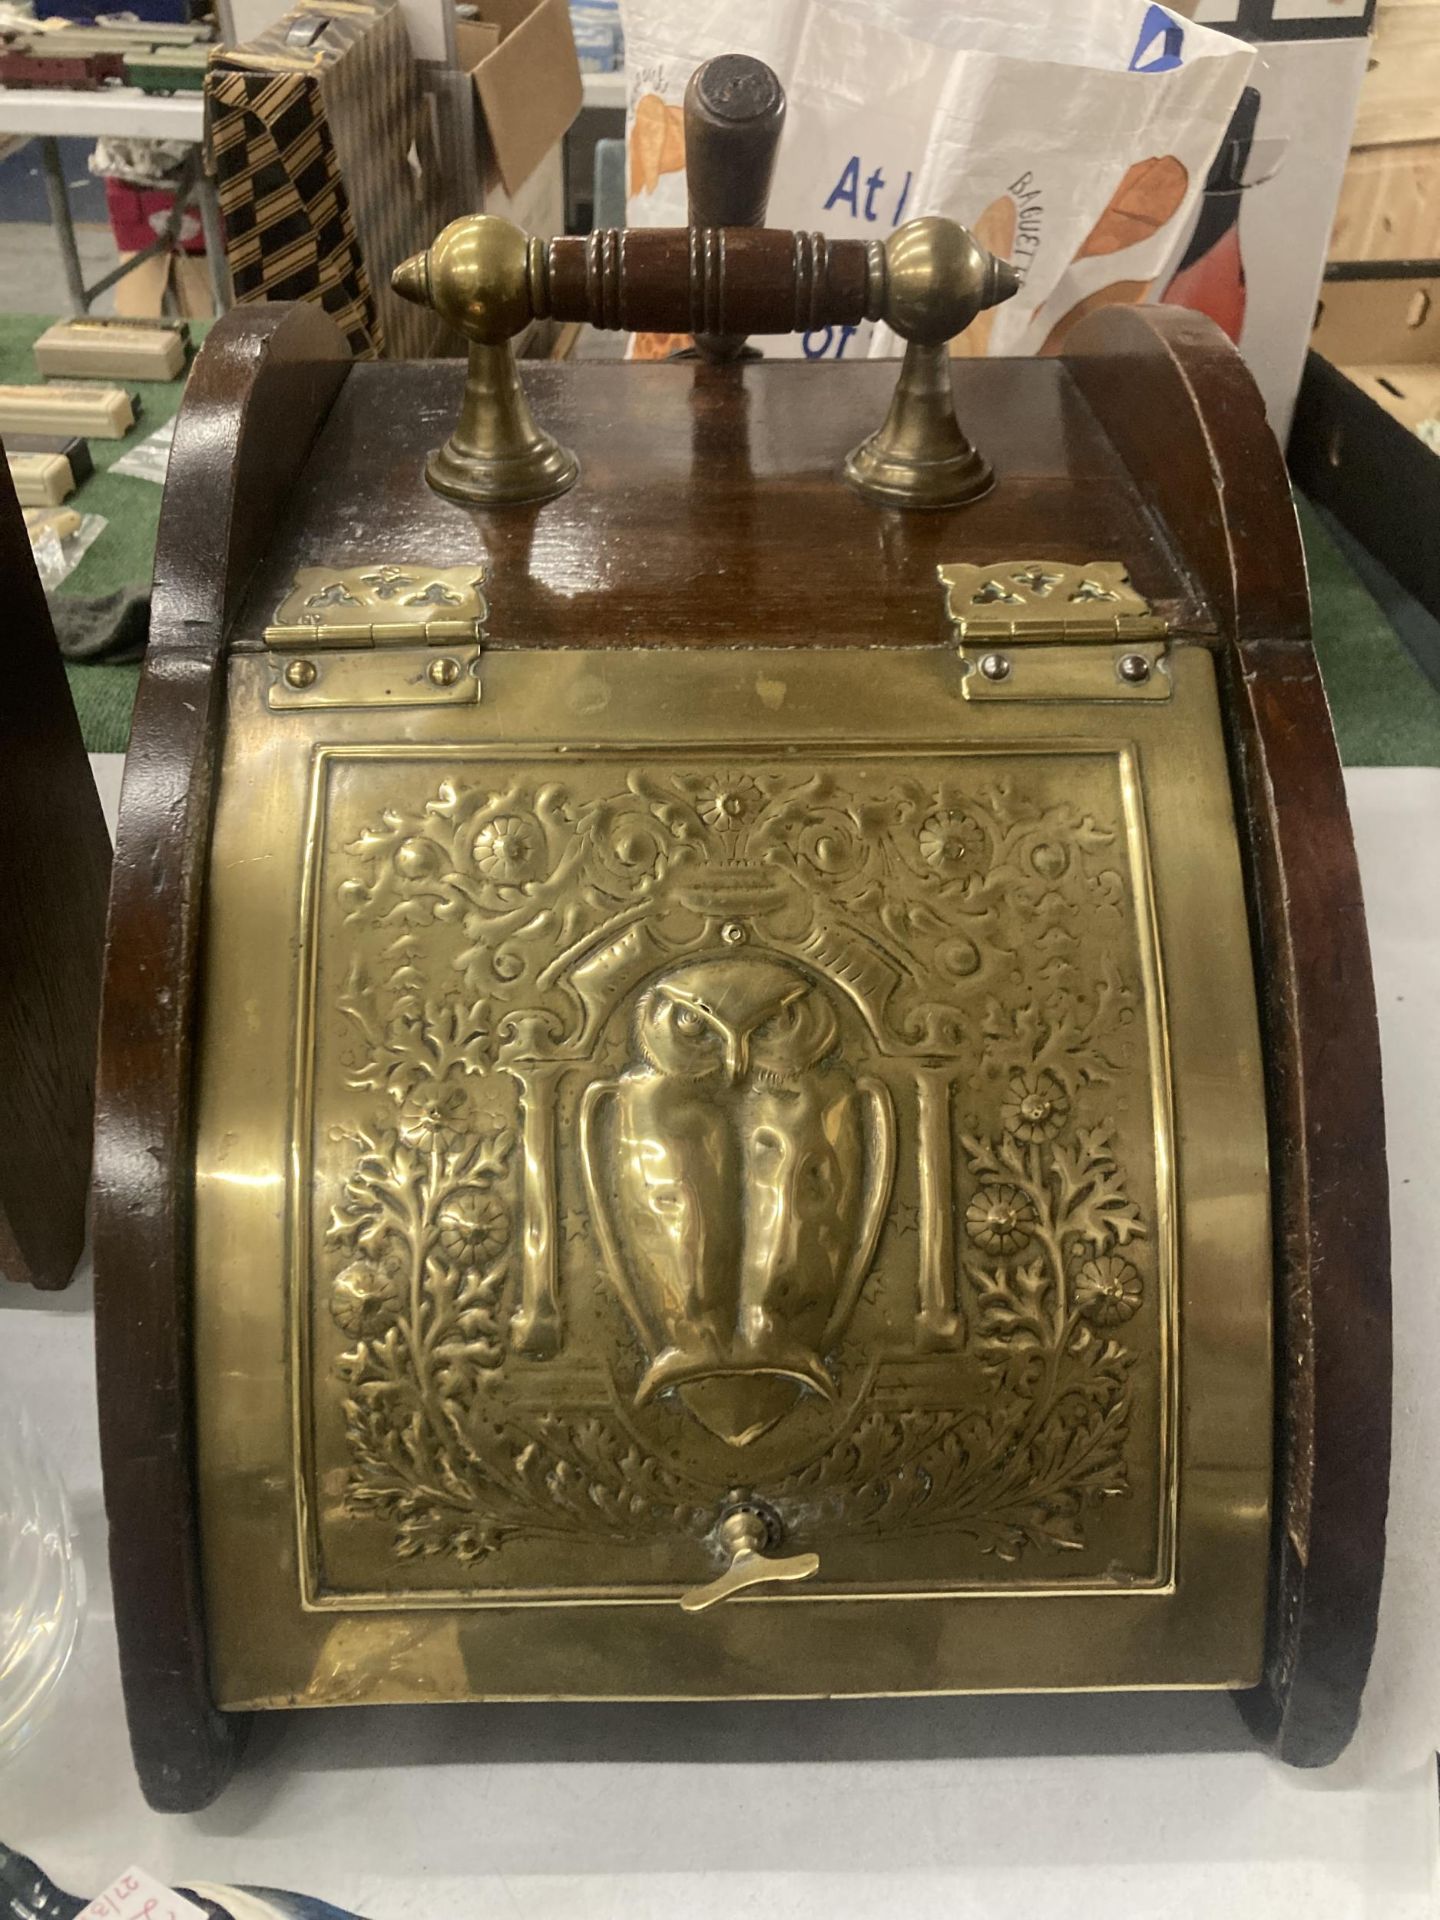 AN ARTS AND CRAFTS, MAHOGANY AND BRASS COAL SCUTTLE, WITH OWL DESIGN TO THE FRONT, PLUS A SHOVEL